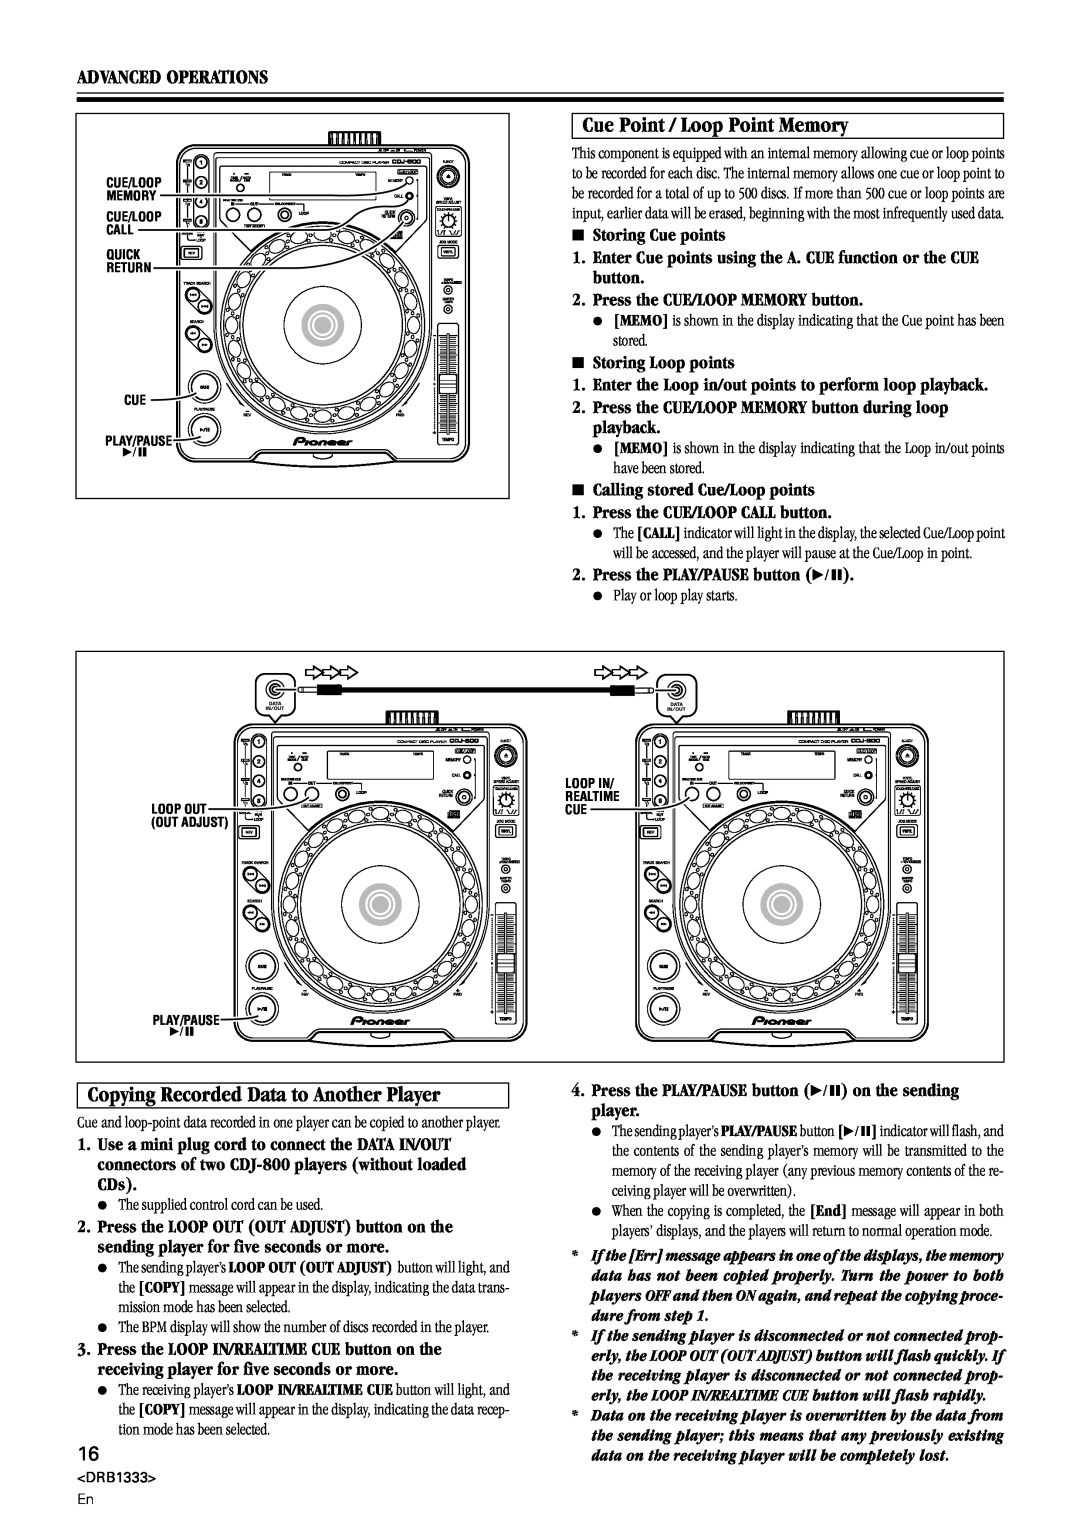 Pioneer CDJ-800 manual Cue Point / Loop Point Memory, Copying Recorded Data to Another Player, Advanced Operations 